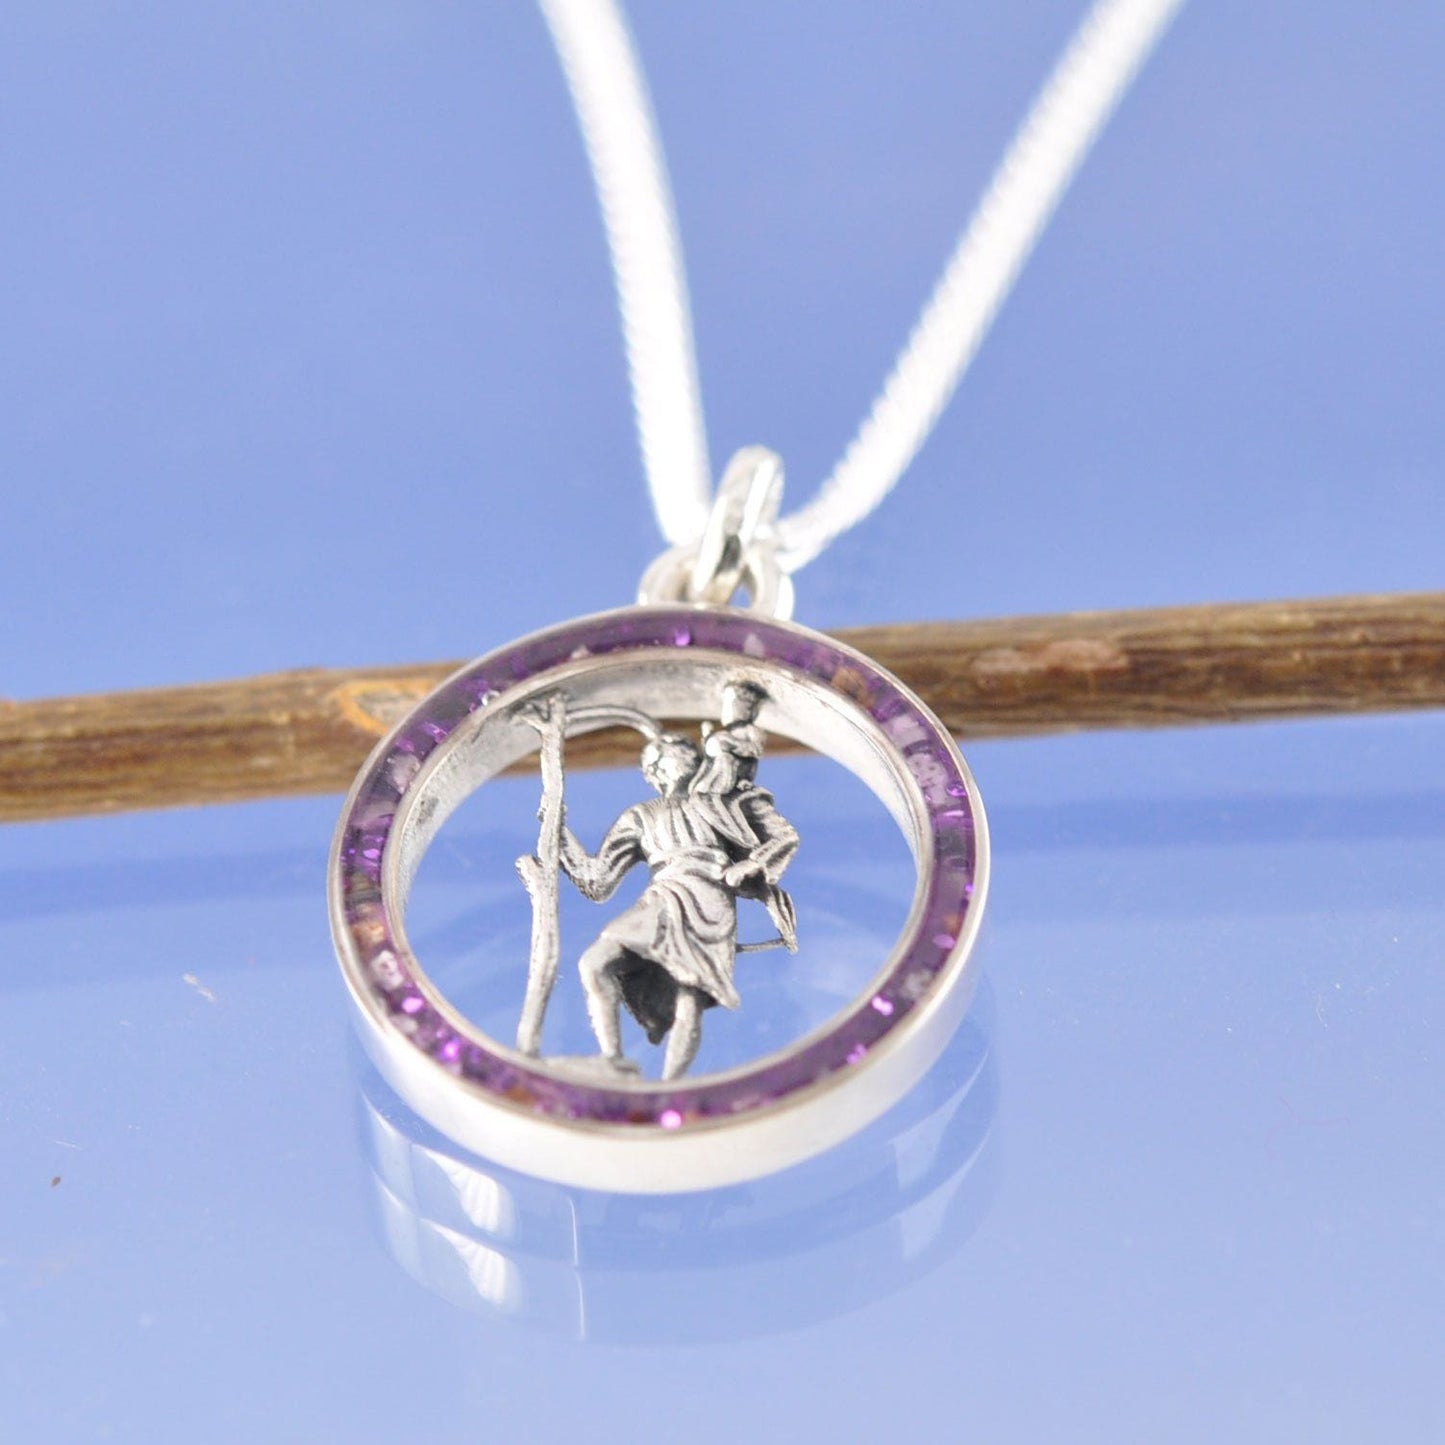 St Christopher Cremation Ash Necklace Pendant by Chris Parry Jewellery